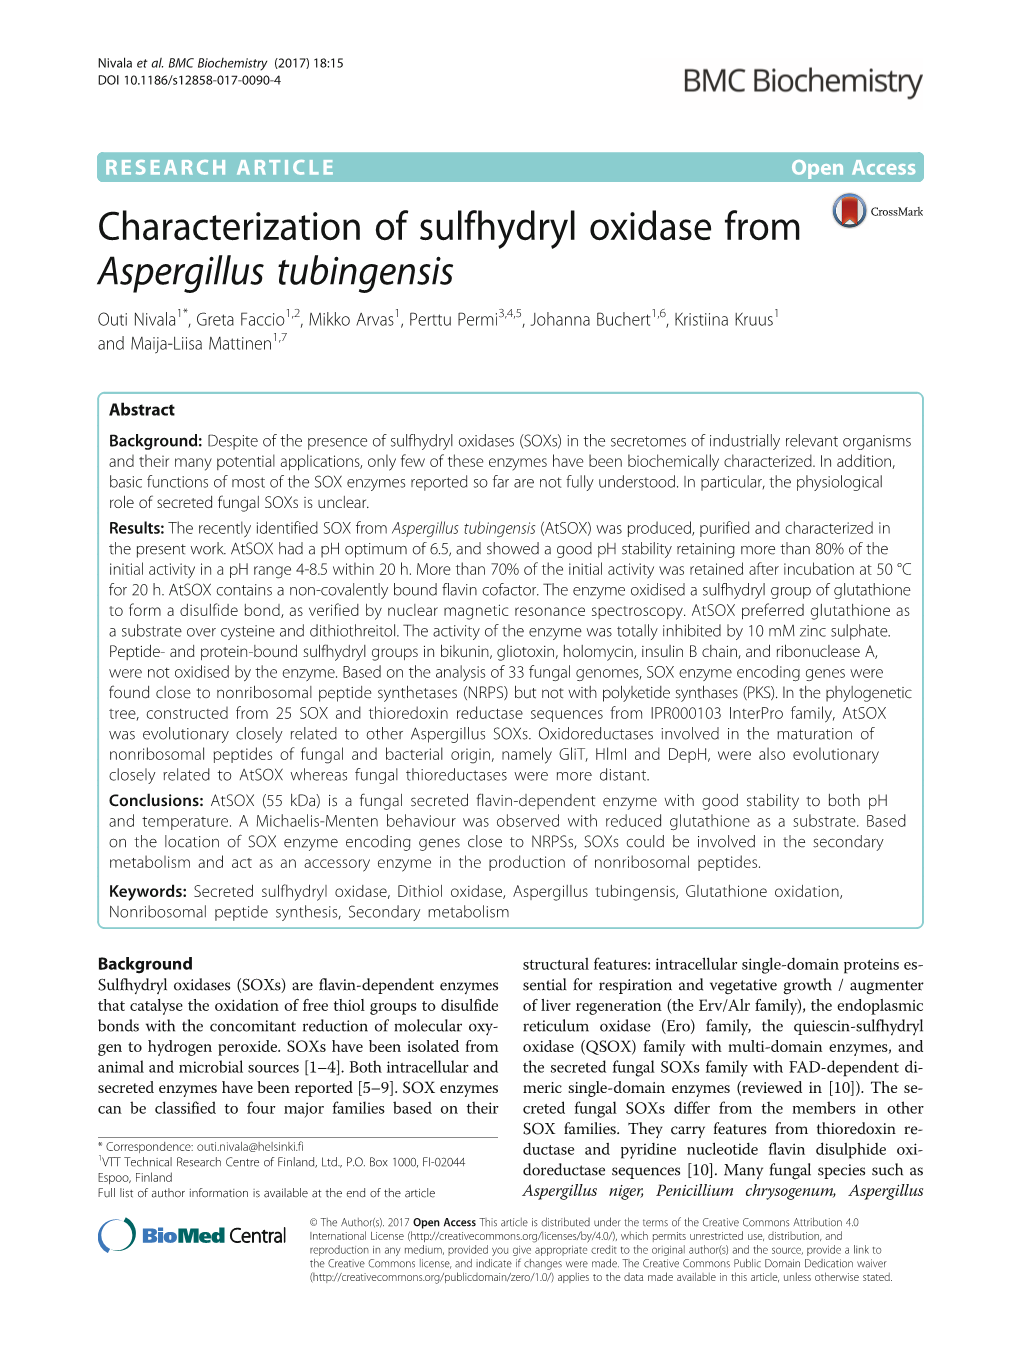 Characterization of Sulfhydryl Oxidase from Aspergillus Tubingensis